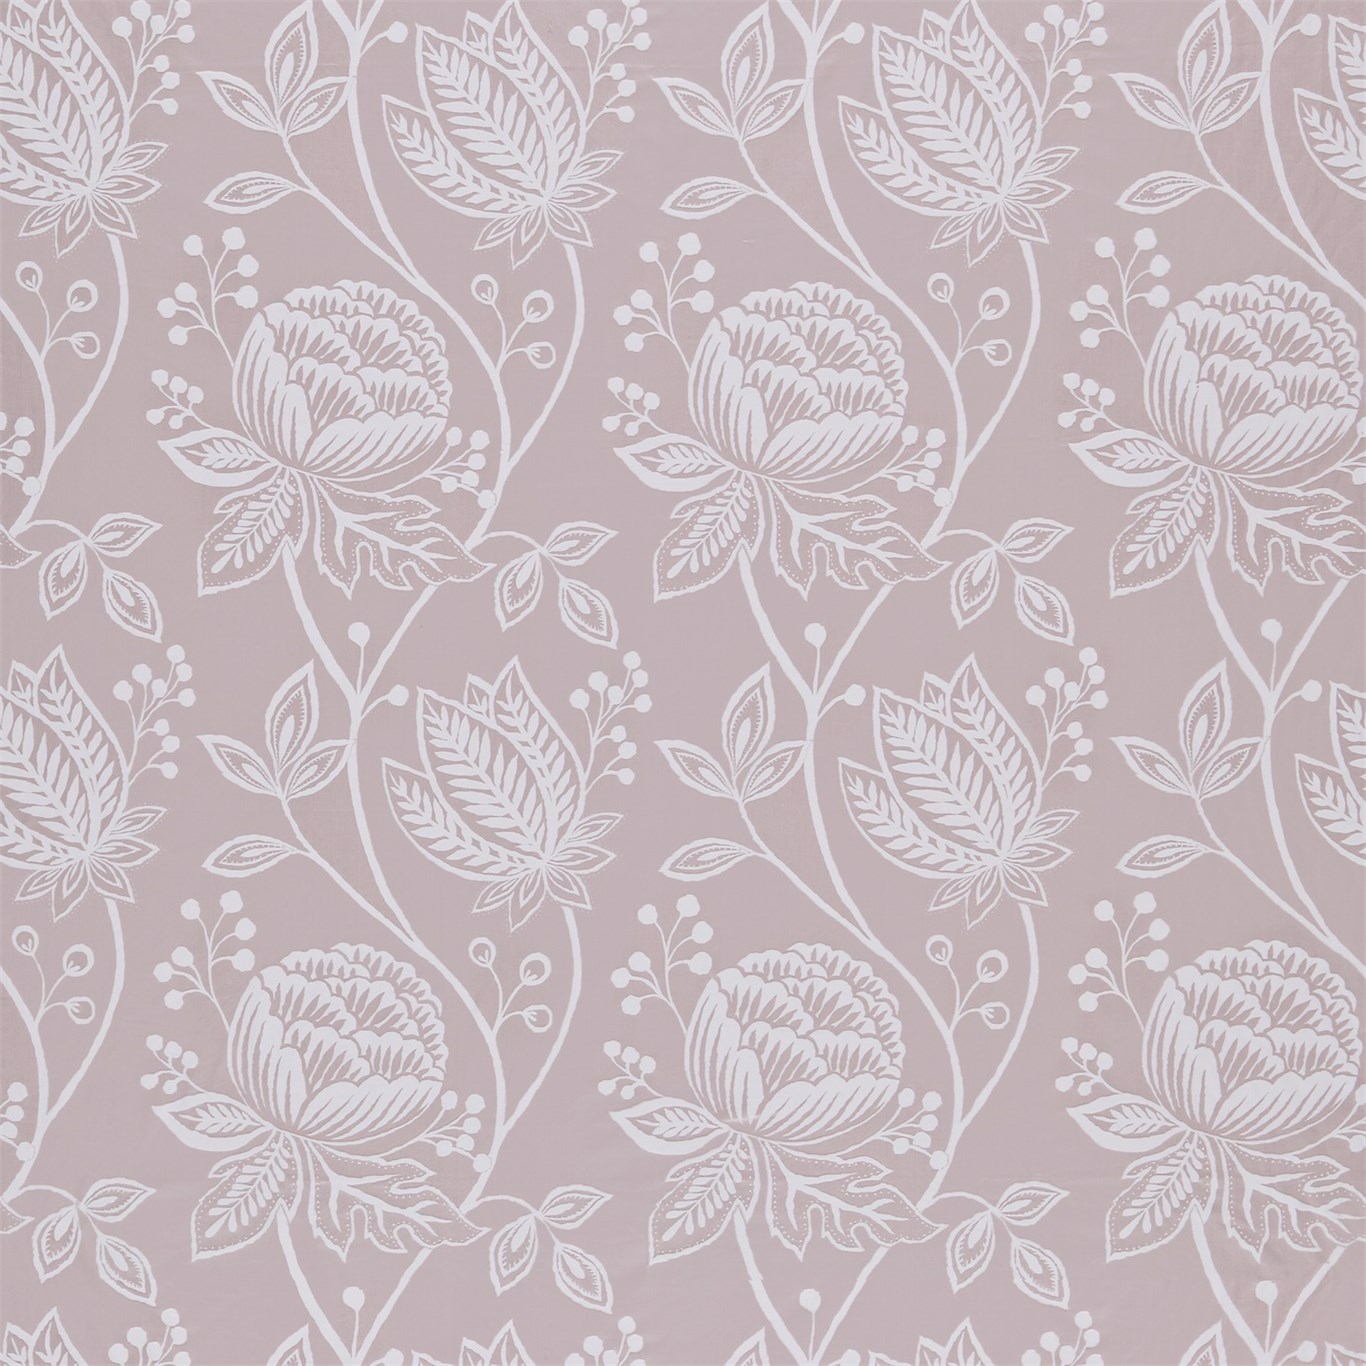 Mirabella Vintage Rose Fabric by HAR